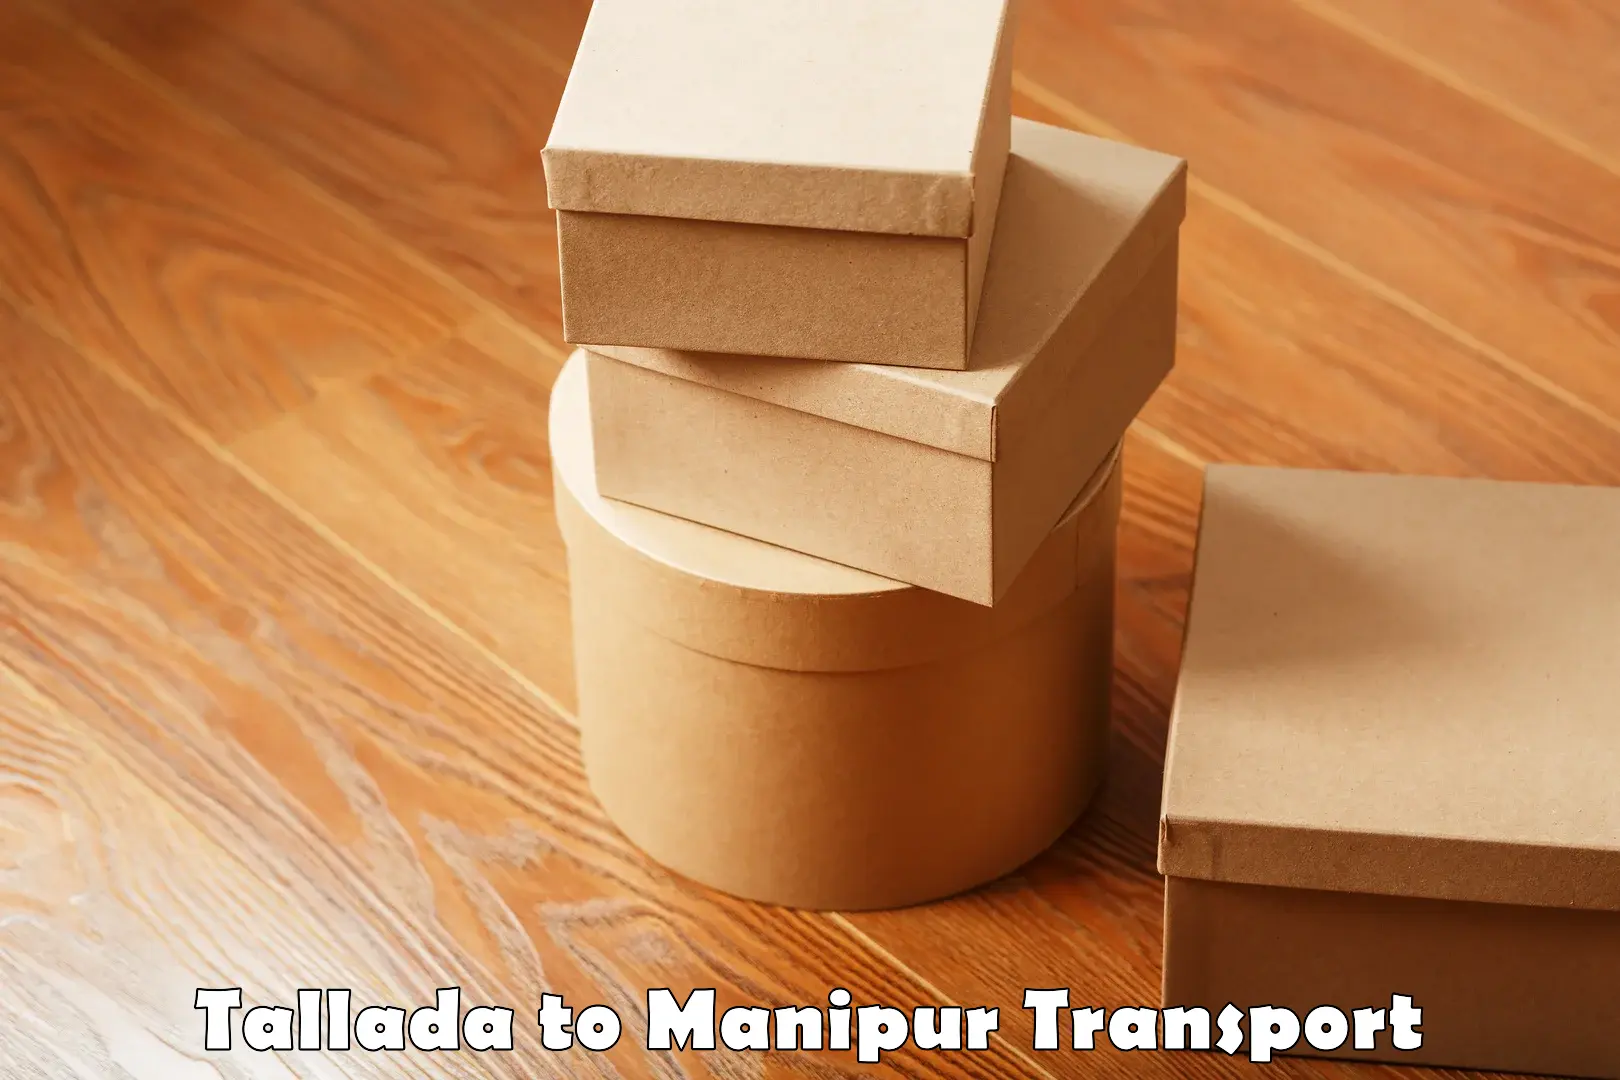 Commercial transport service Tallada to Manipur